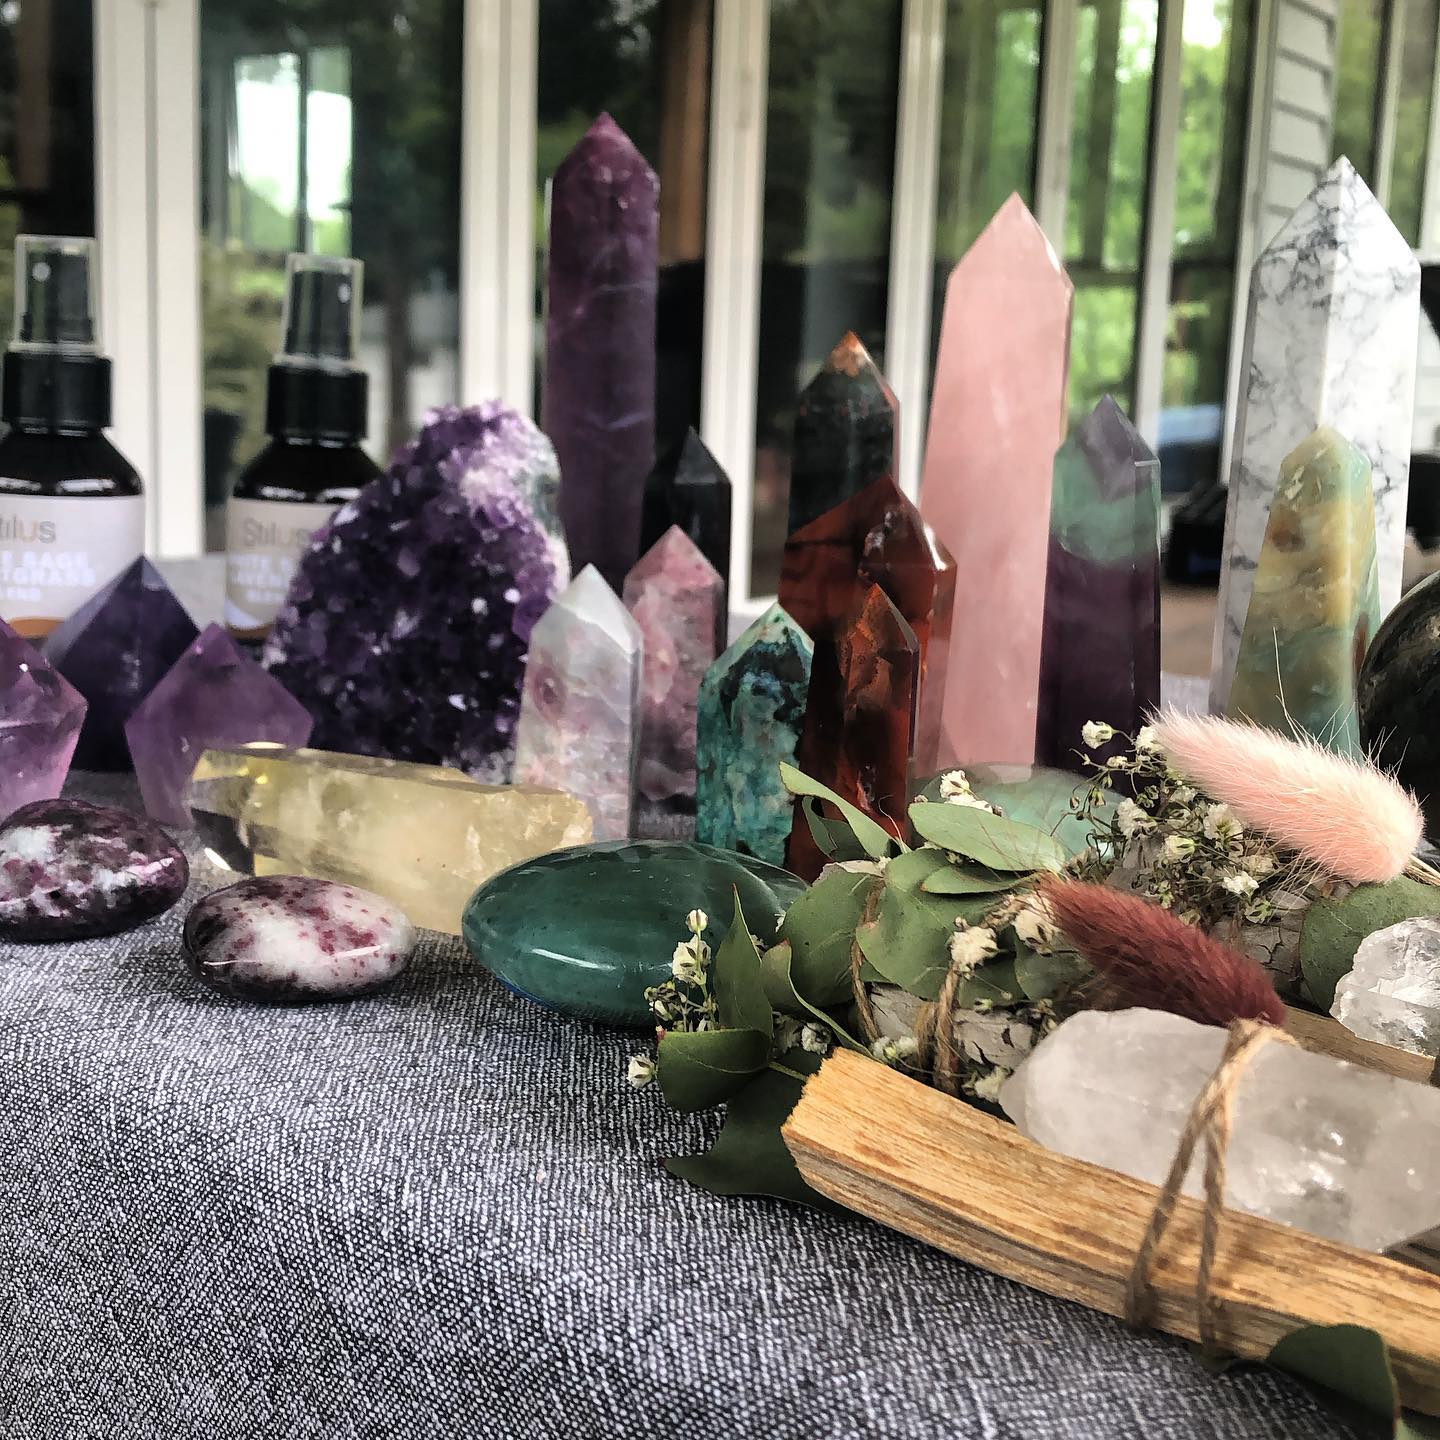 There are many different types of crystals on the table.